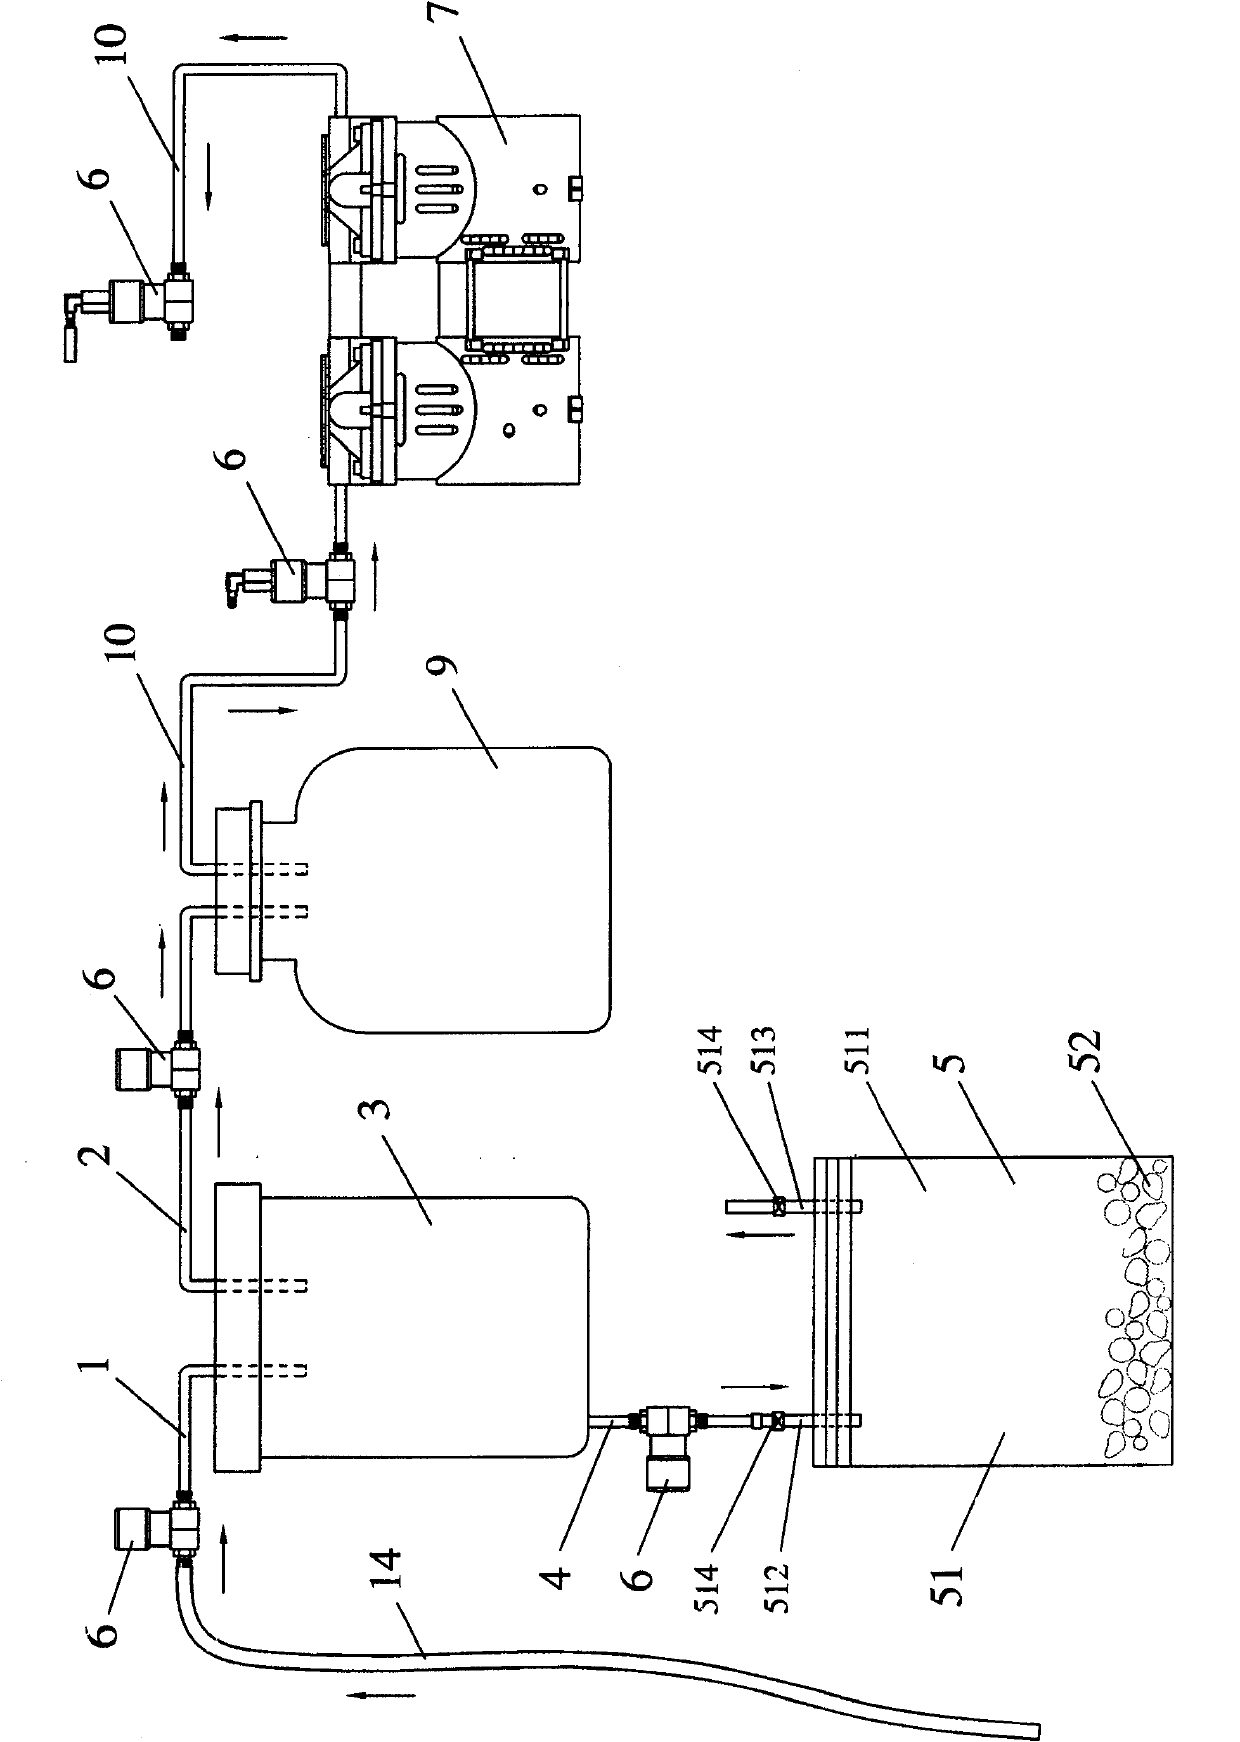 Automatic apparatus for collecting and treating medical sewage